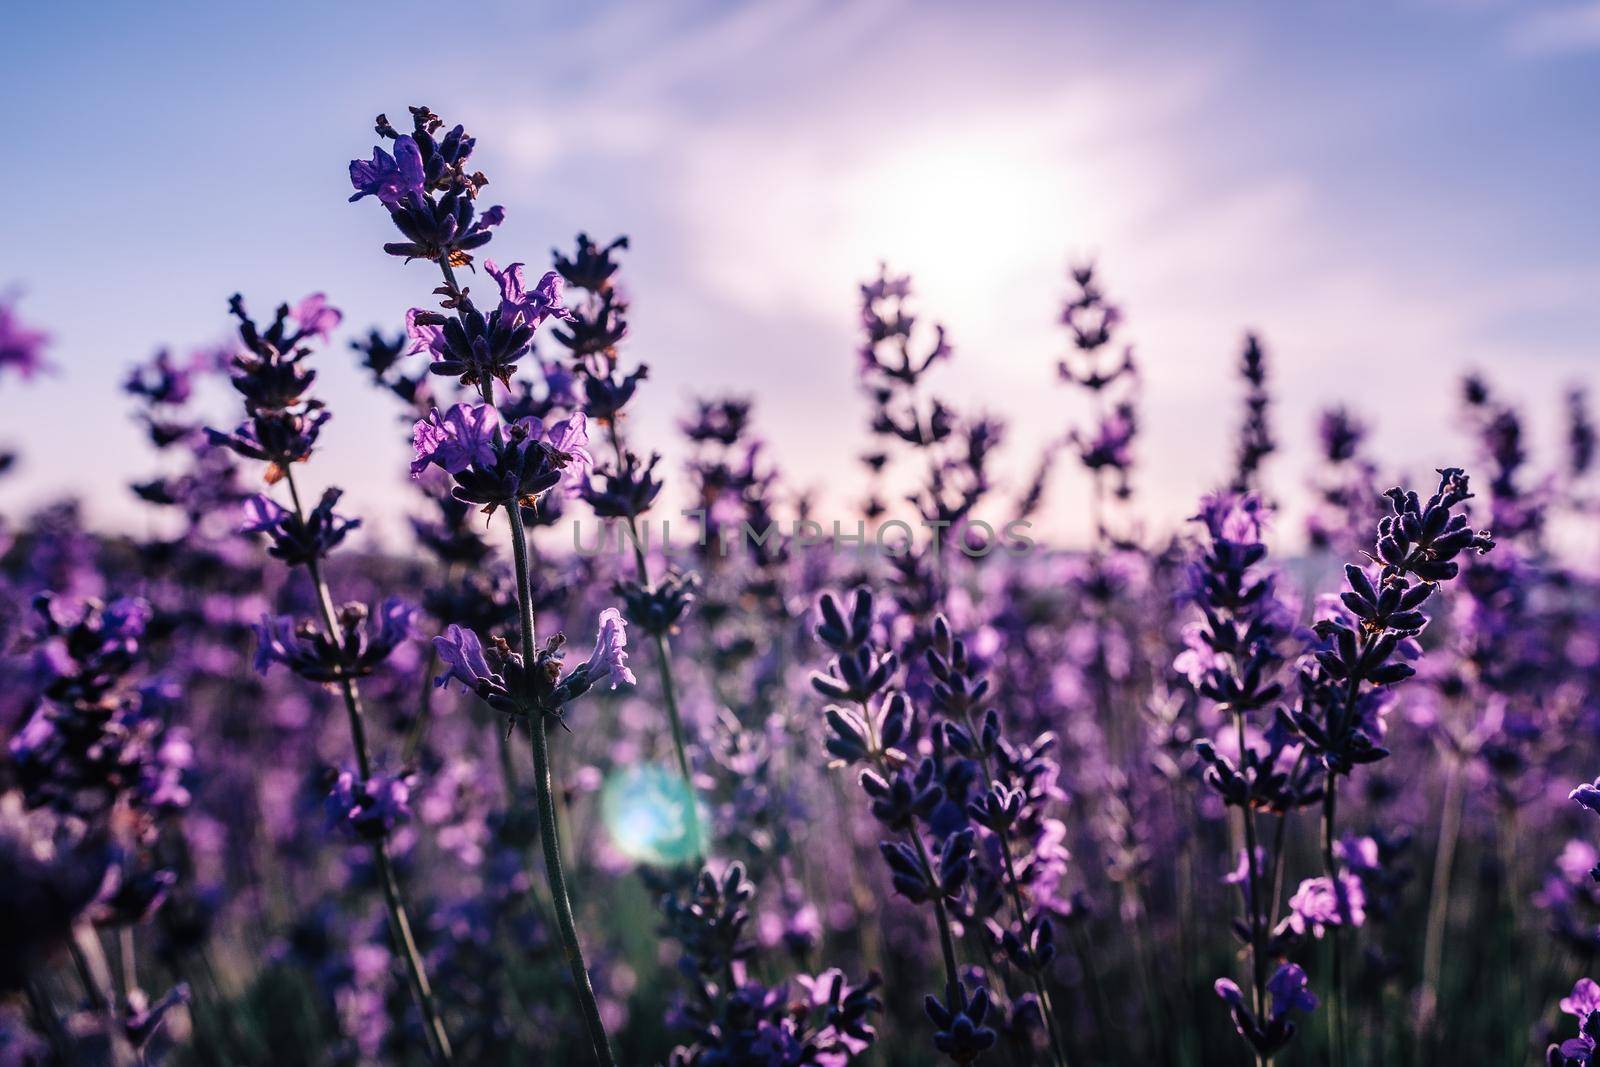 Close up Lavender flower blooming scented fields in endless rows on sunset. Selective focus on Bushes of lavender purple aromatic flowers at lavender fields